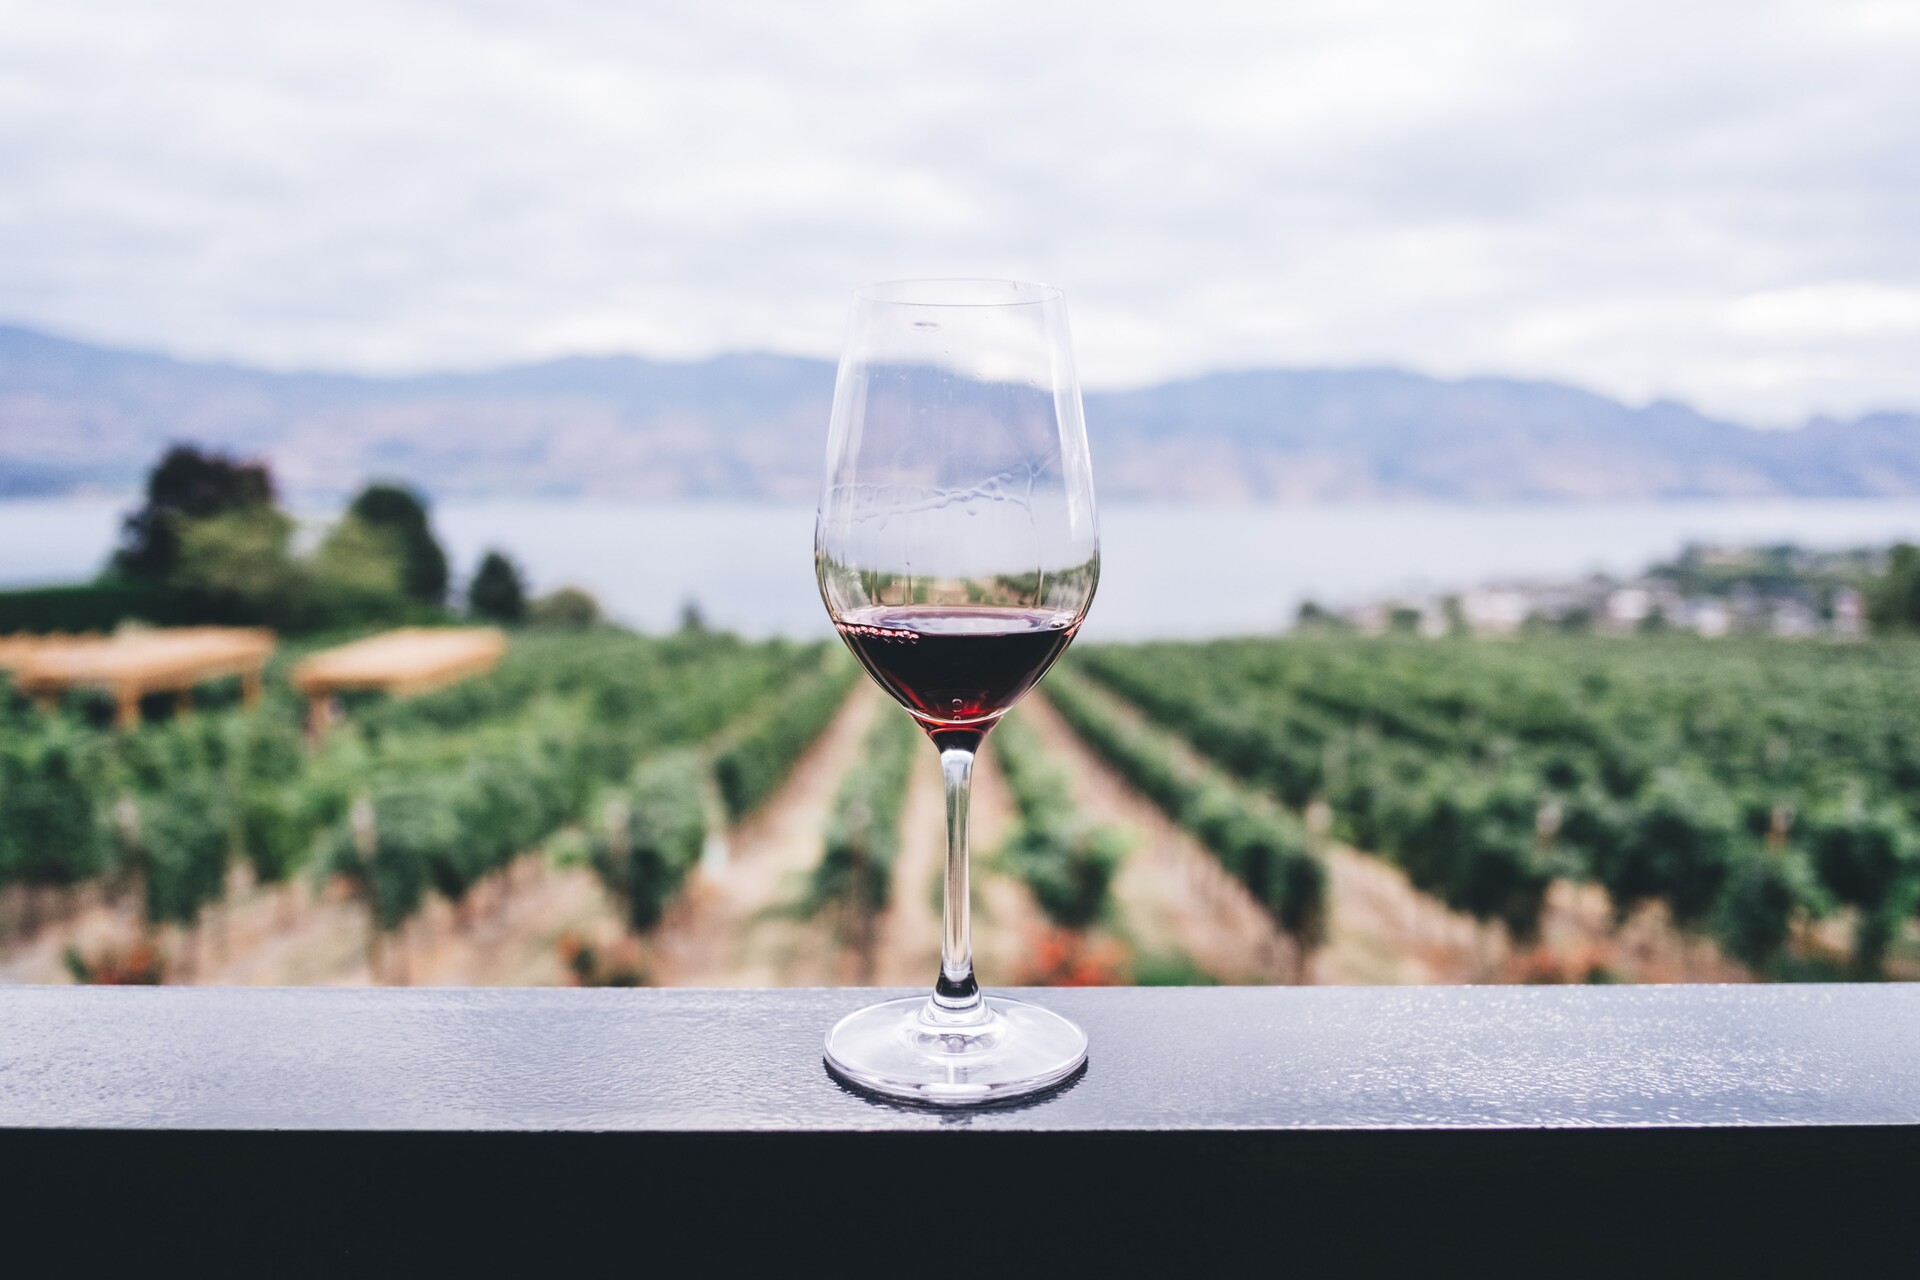 A glass of wine in front of a vineyard